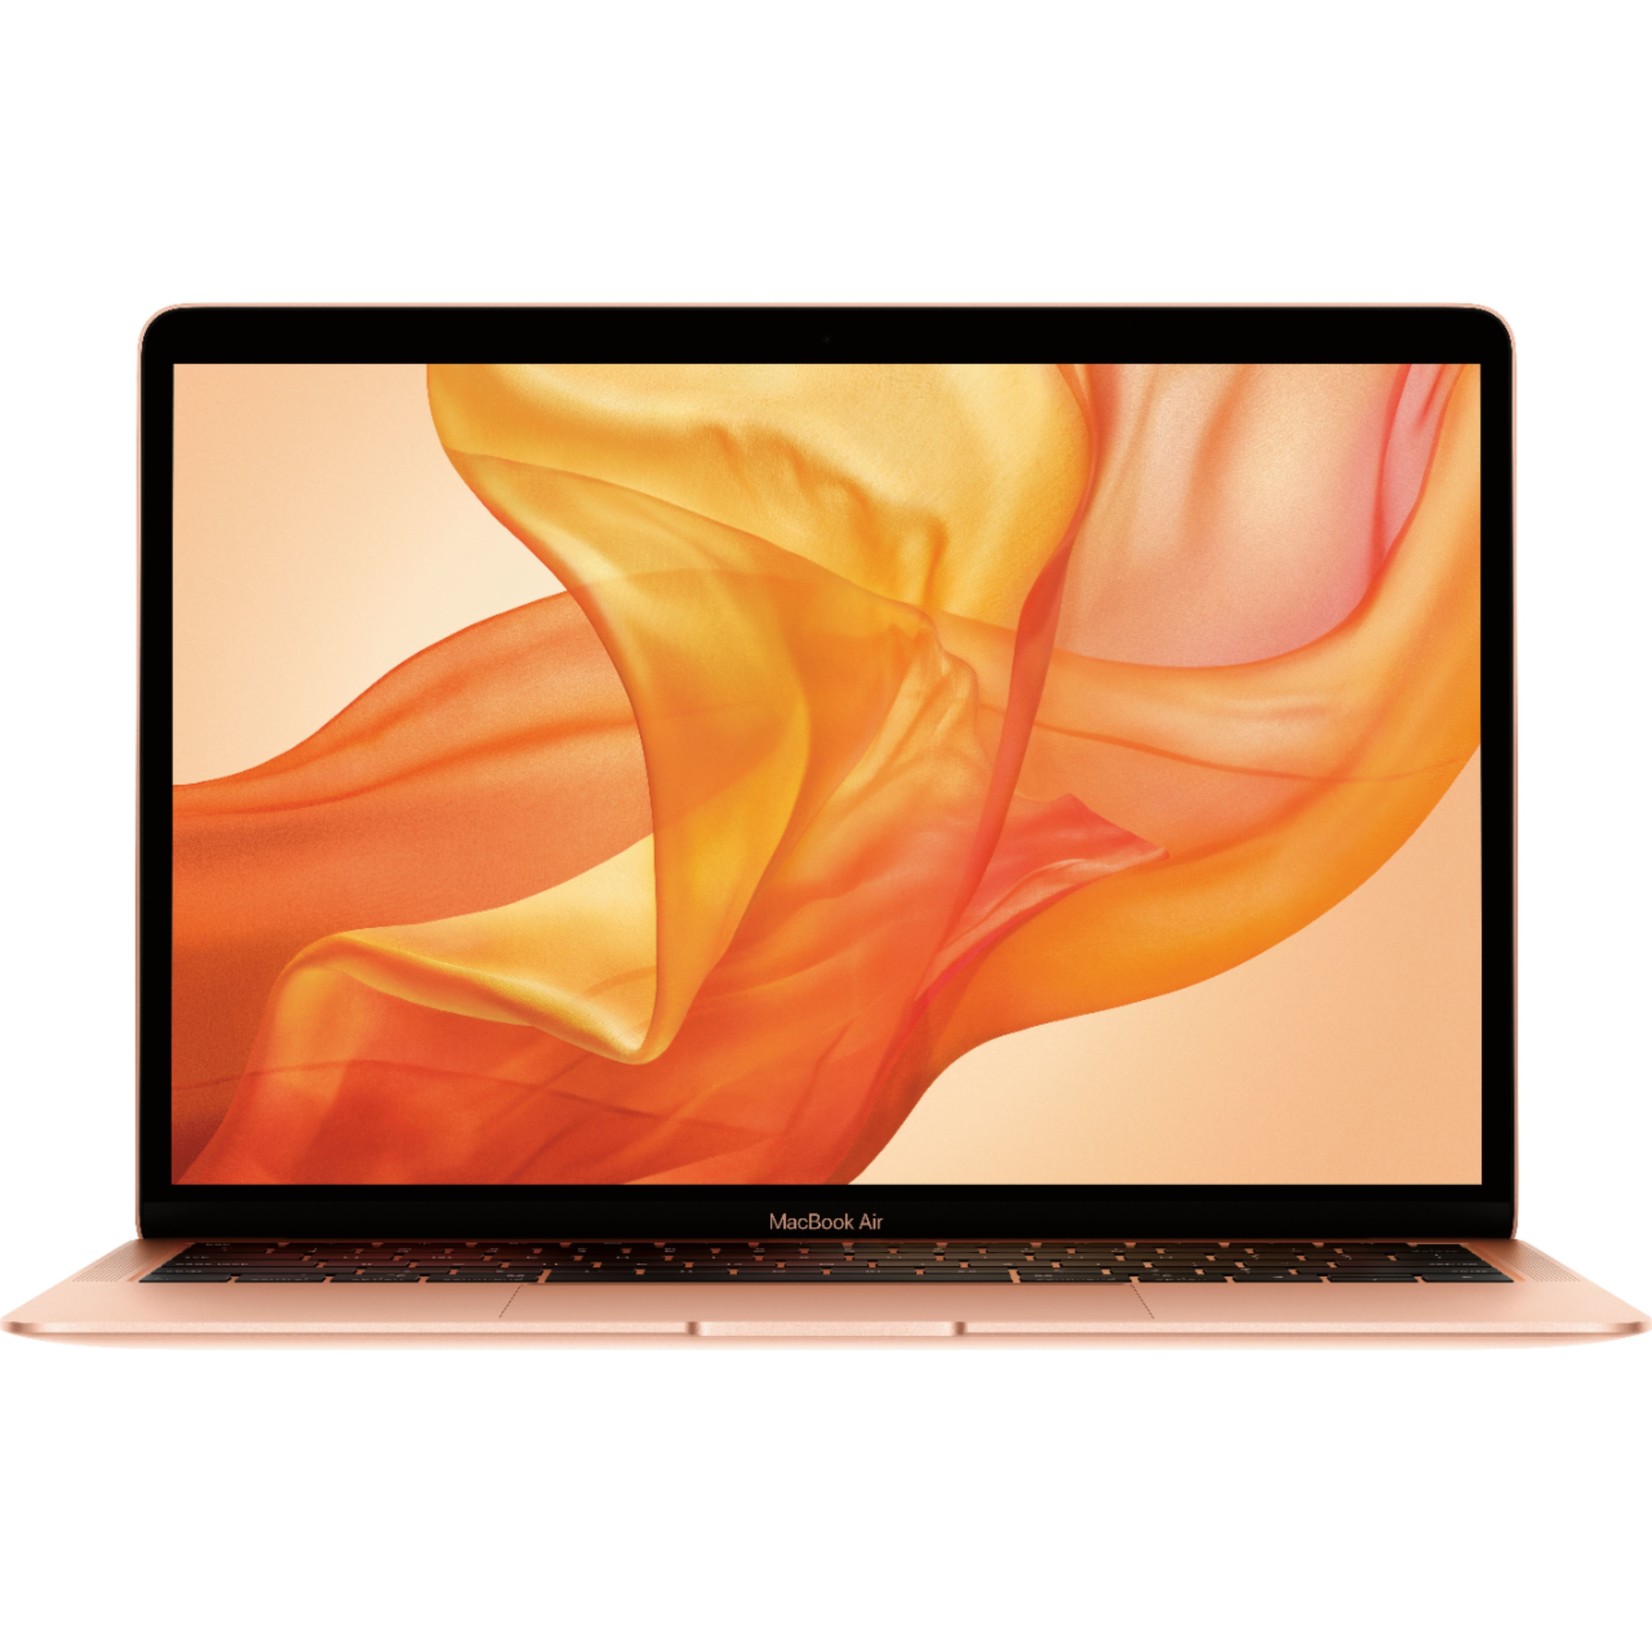 Apple OPEN BOX 13-inch MacBook Air (2019) 1.6GHz i5/8GB/128GB - Gold (No Charger)